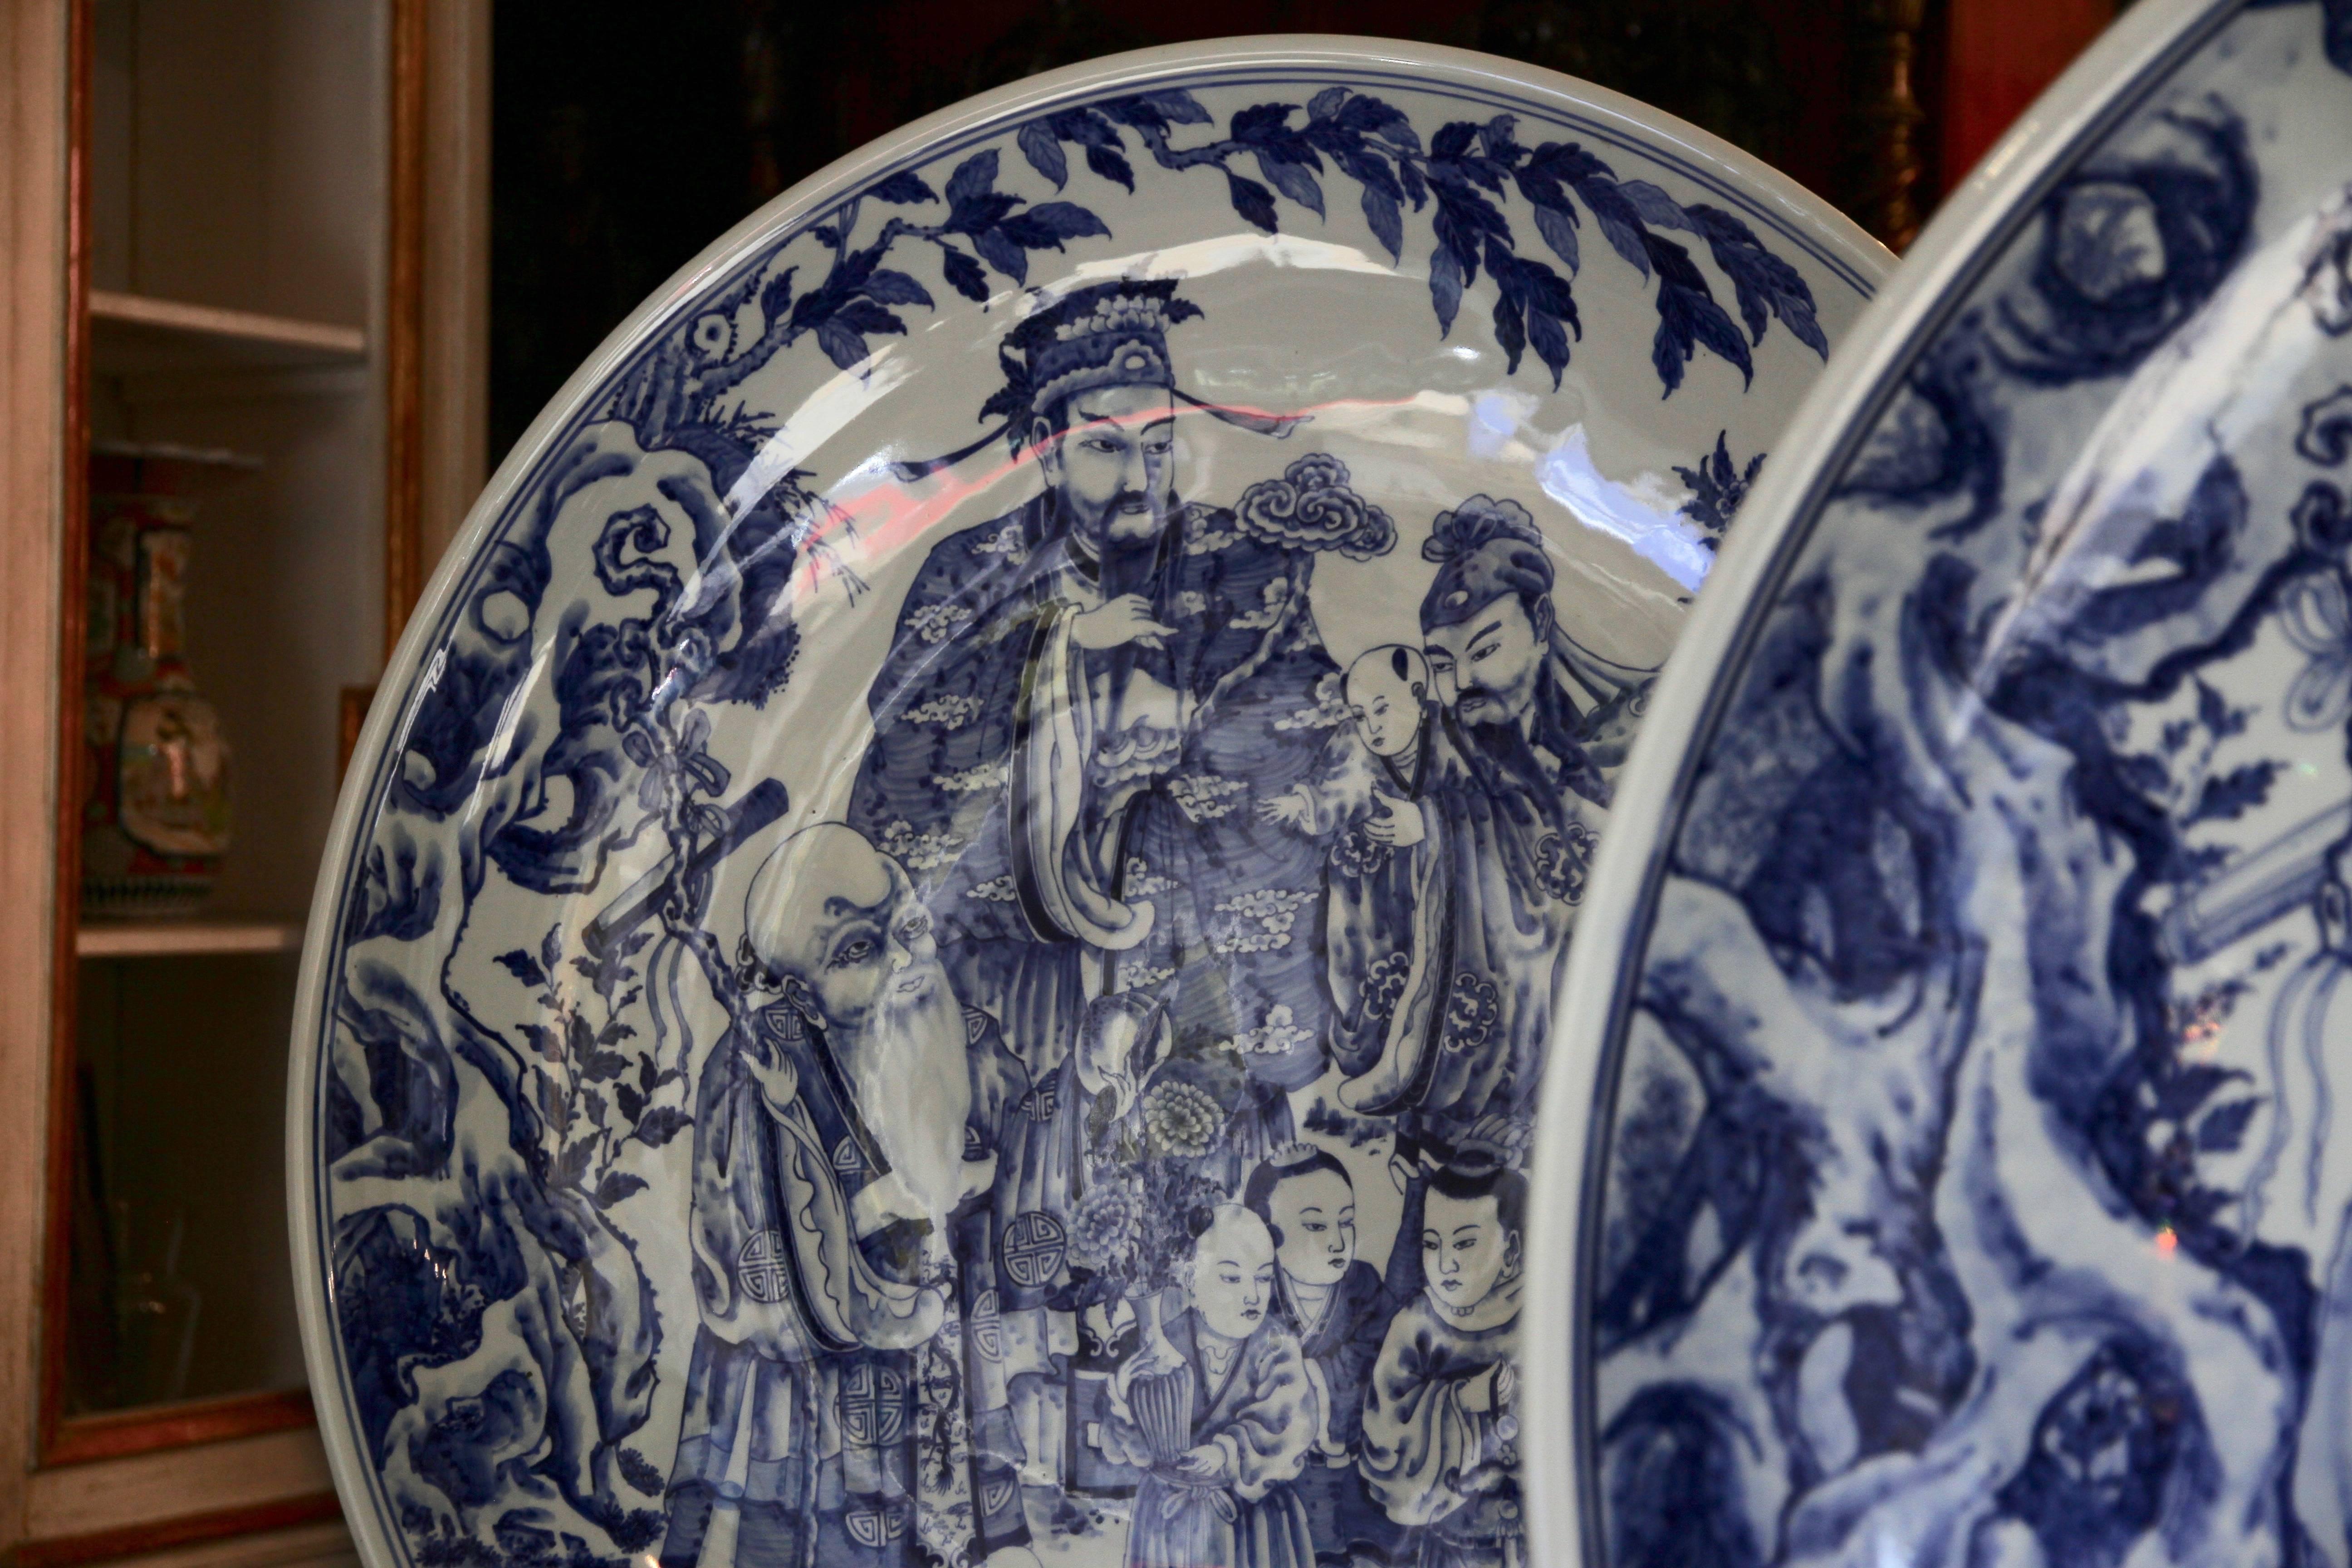 Pair of blue and white ceramic plates figuring Fú, Lù and Shòu, three gods representing three qualities of Prosperity (Fu), Status (Lu), and Longevity (Shou) in Chinese religion.

Fu wears, in general, a scholar or mandarin dress. Lu is holding a